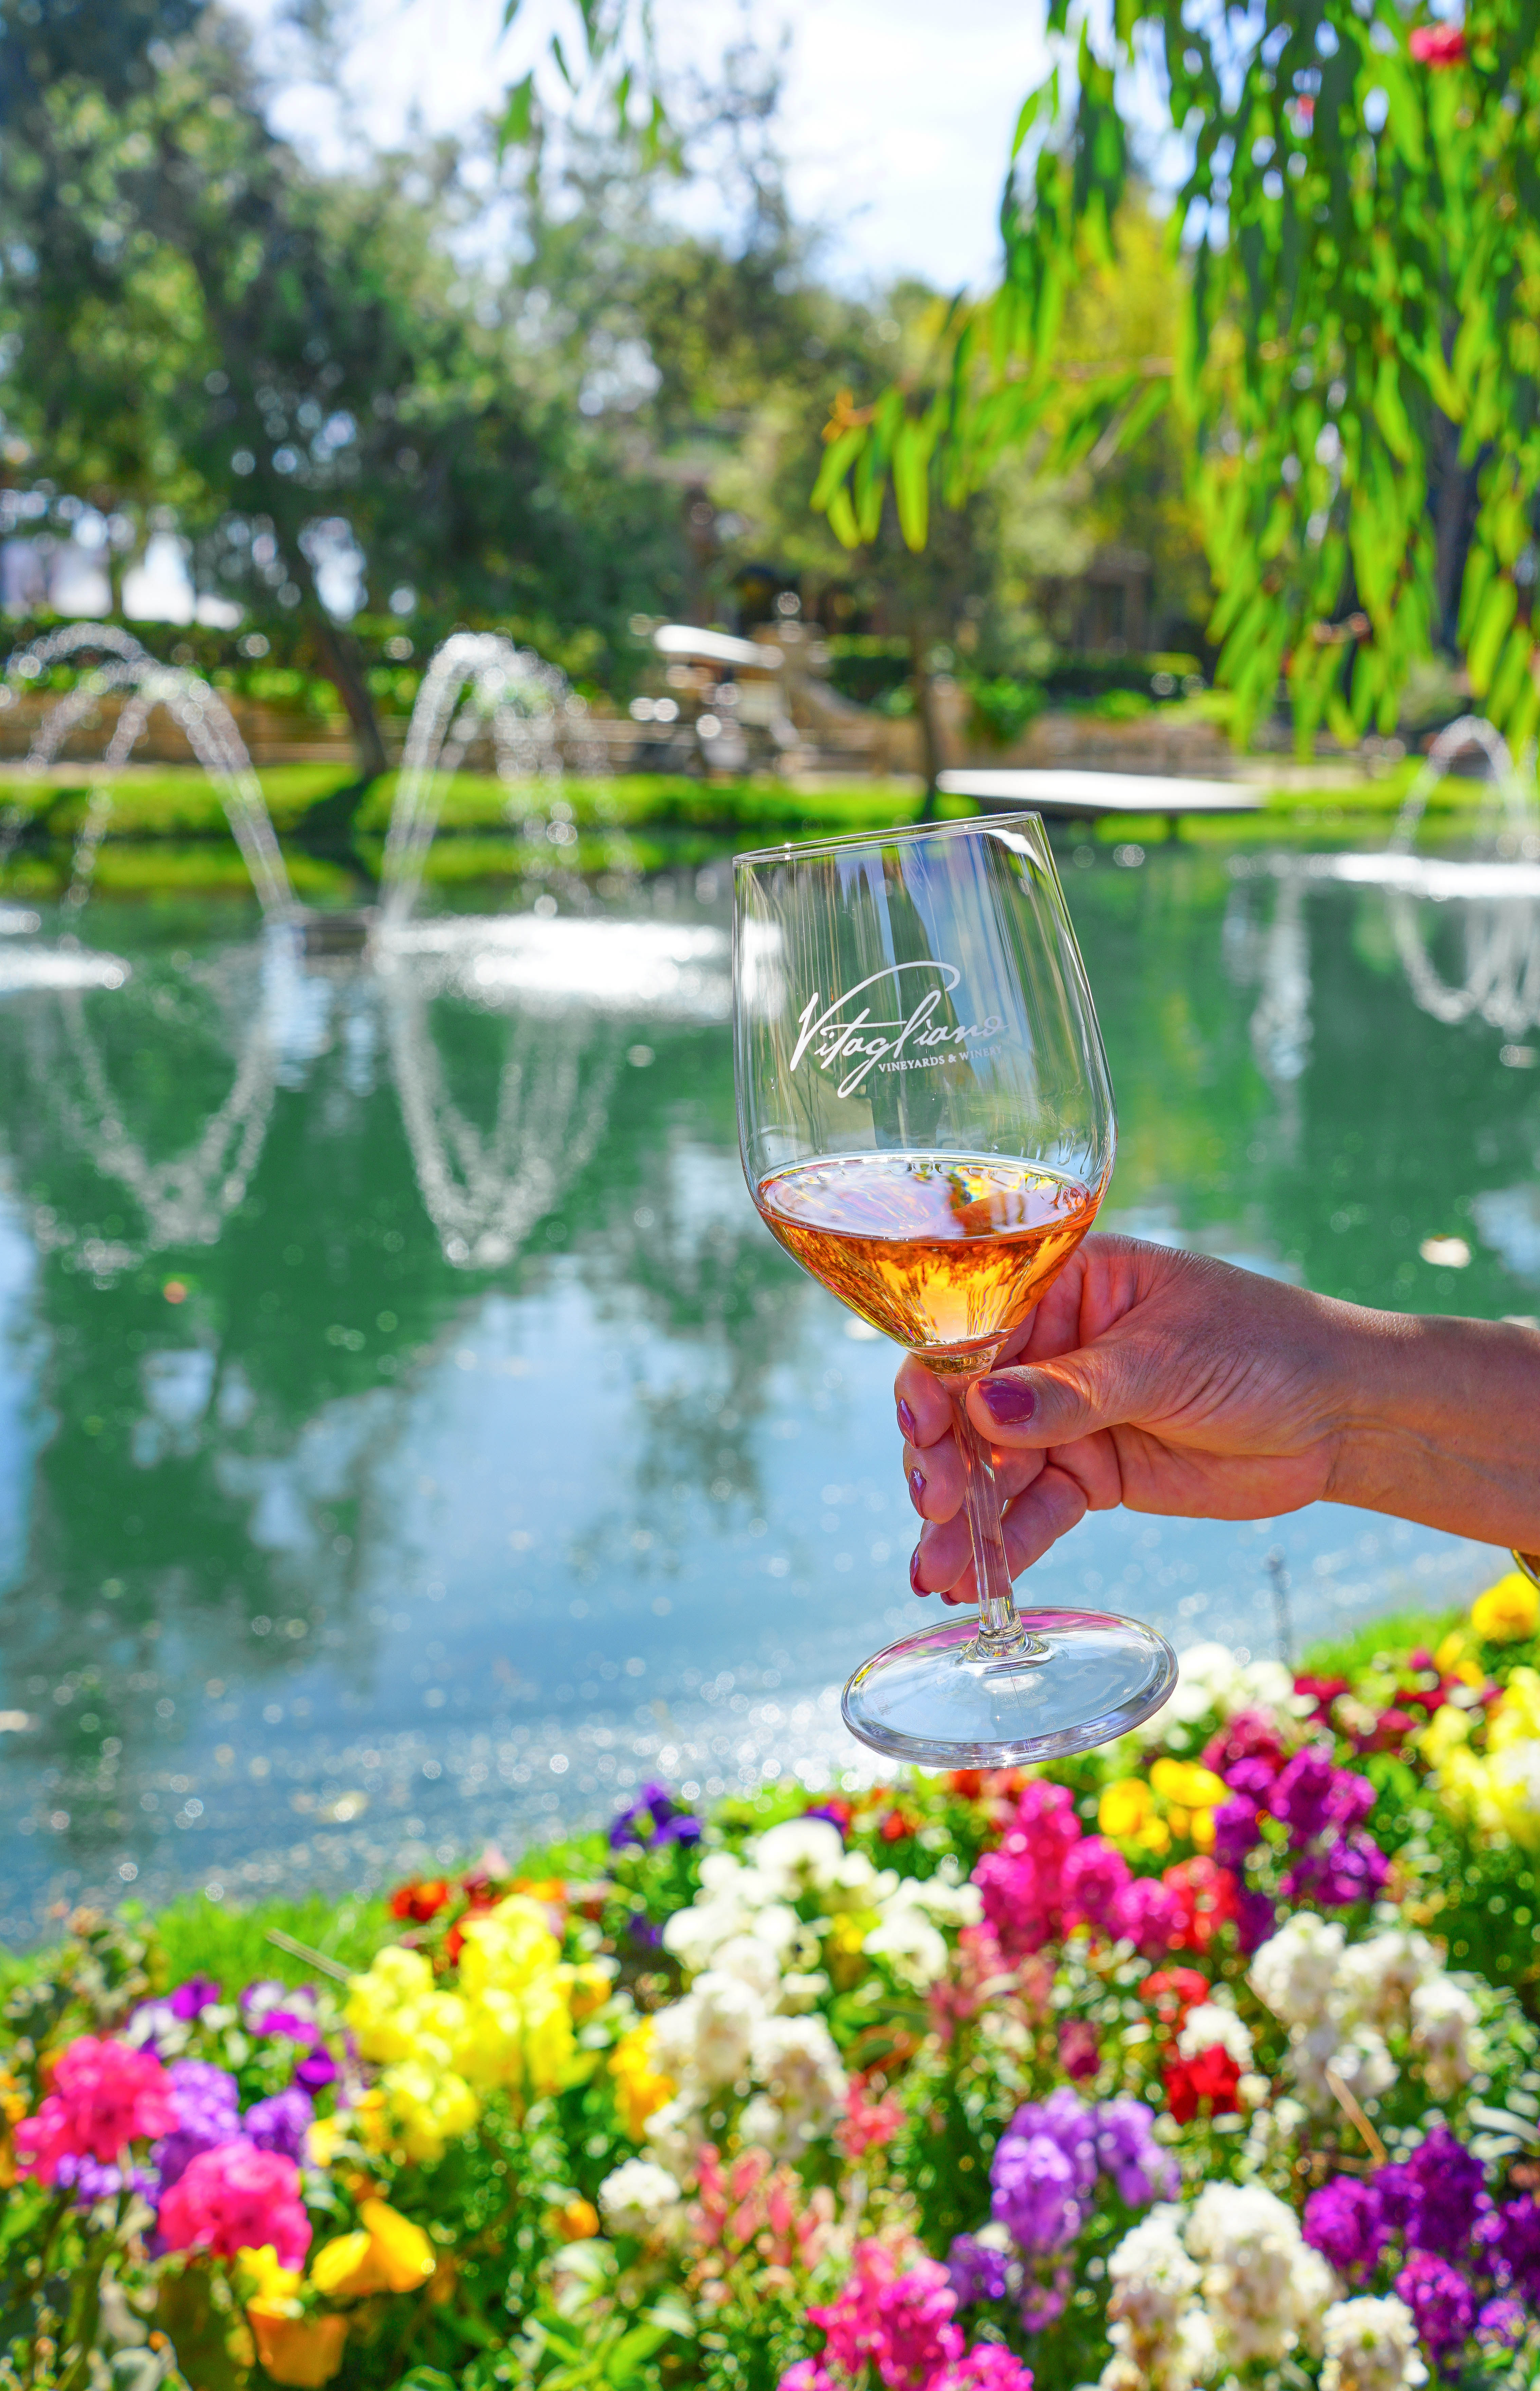 Wine tasting outdoors in Temecula Valley Southern California Wine Country